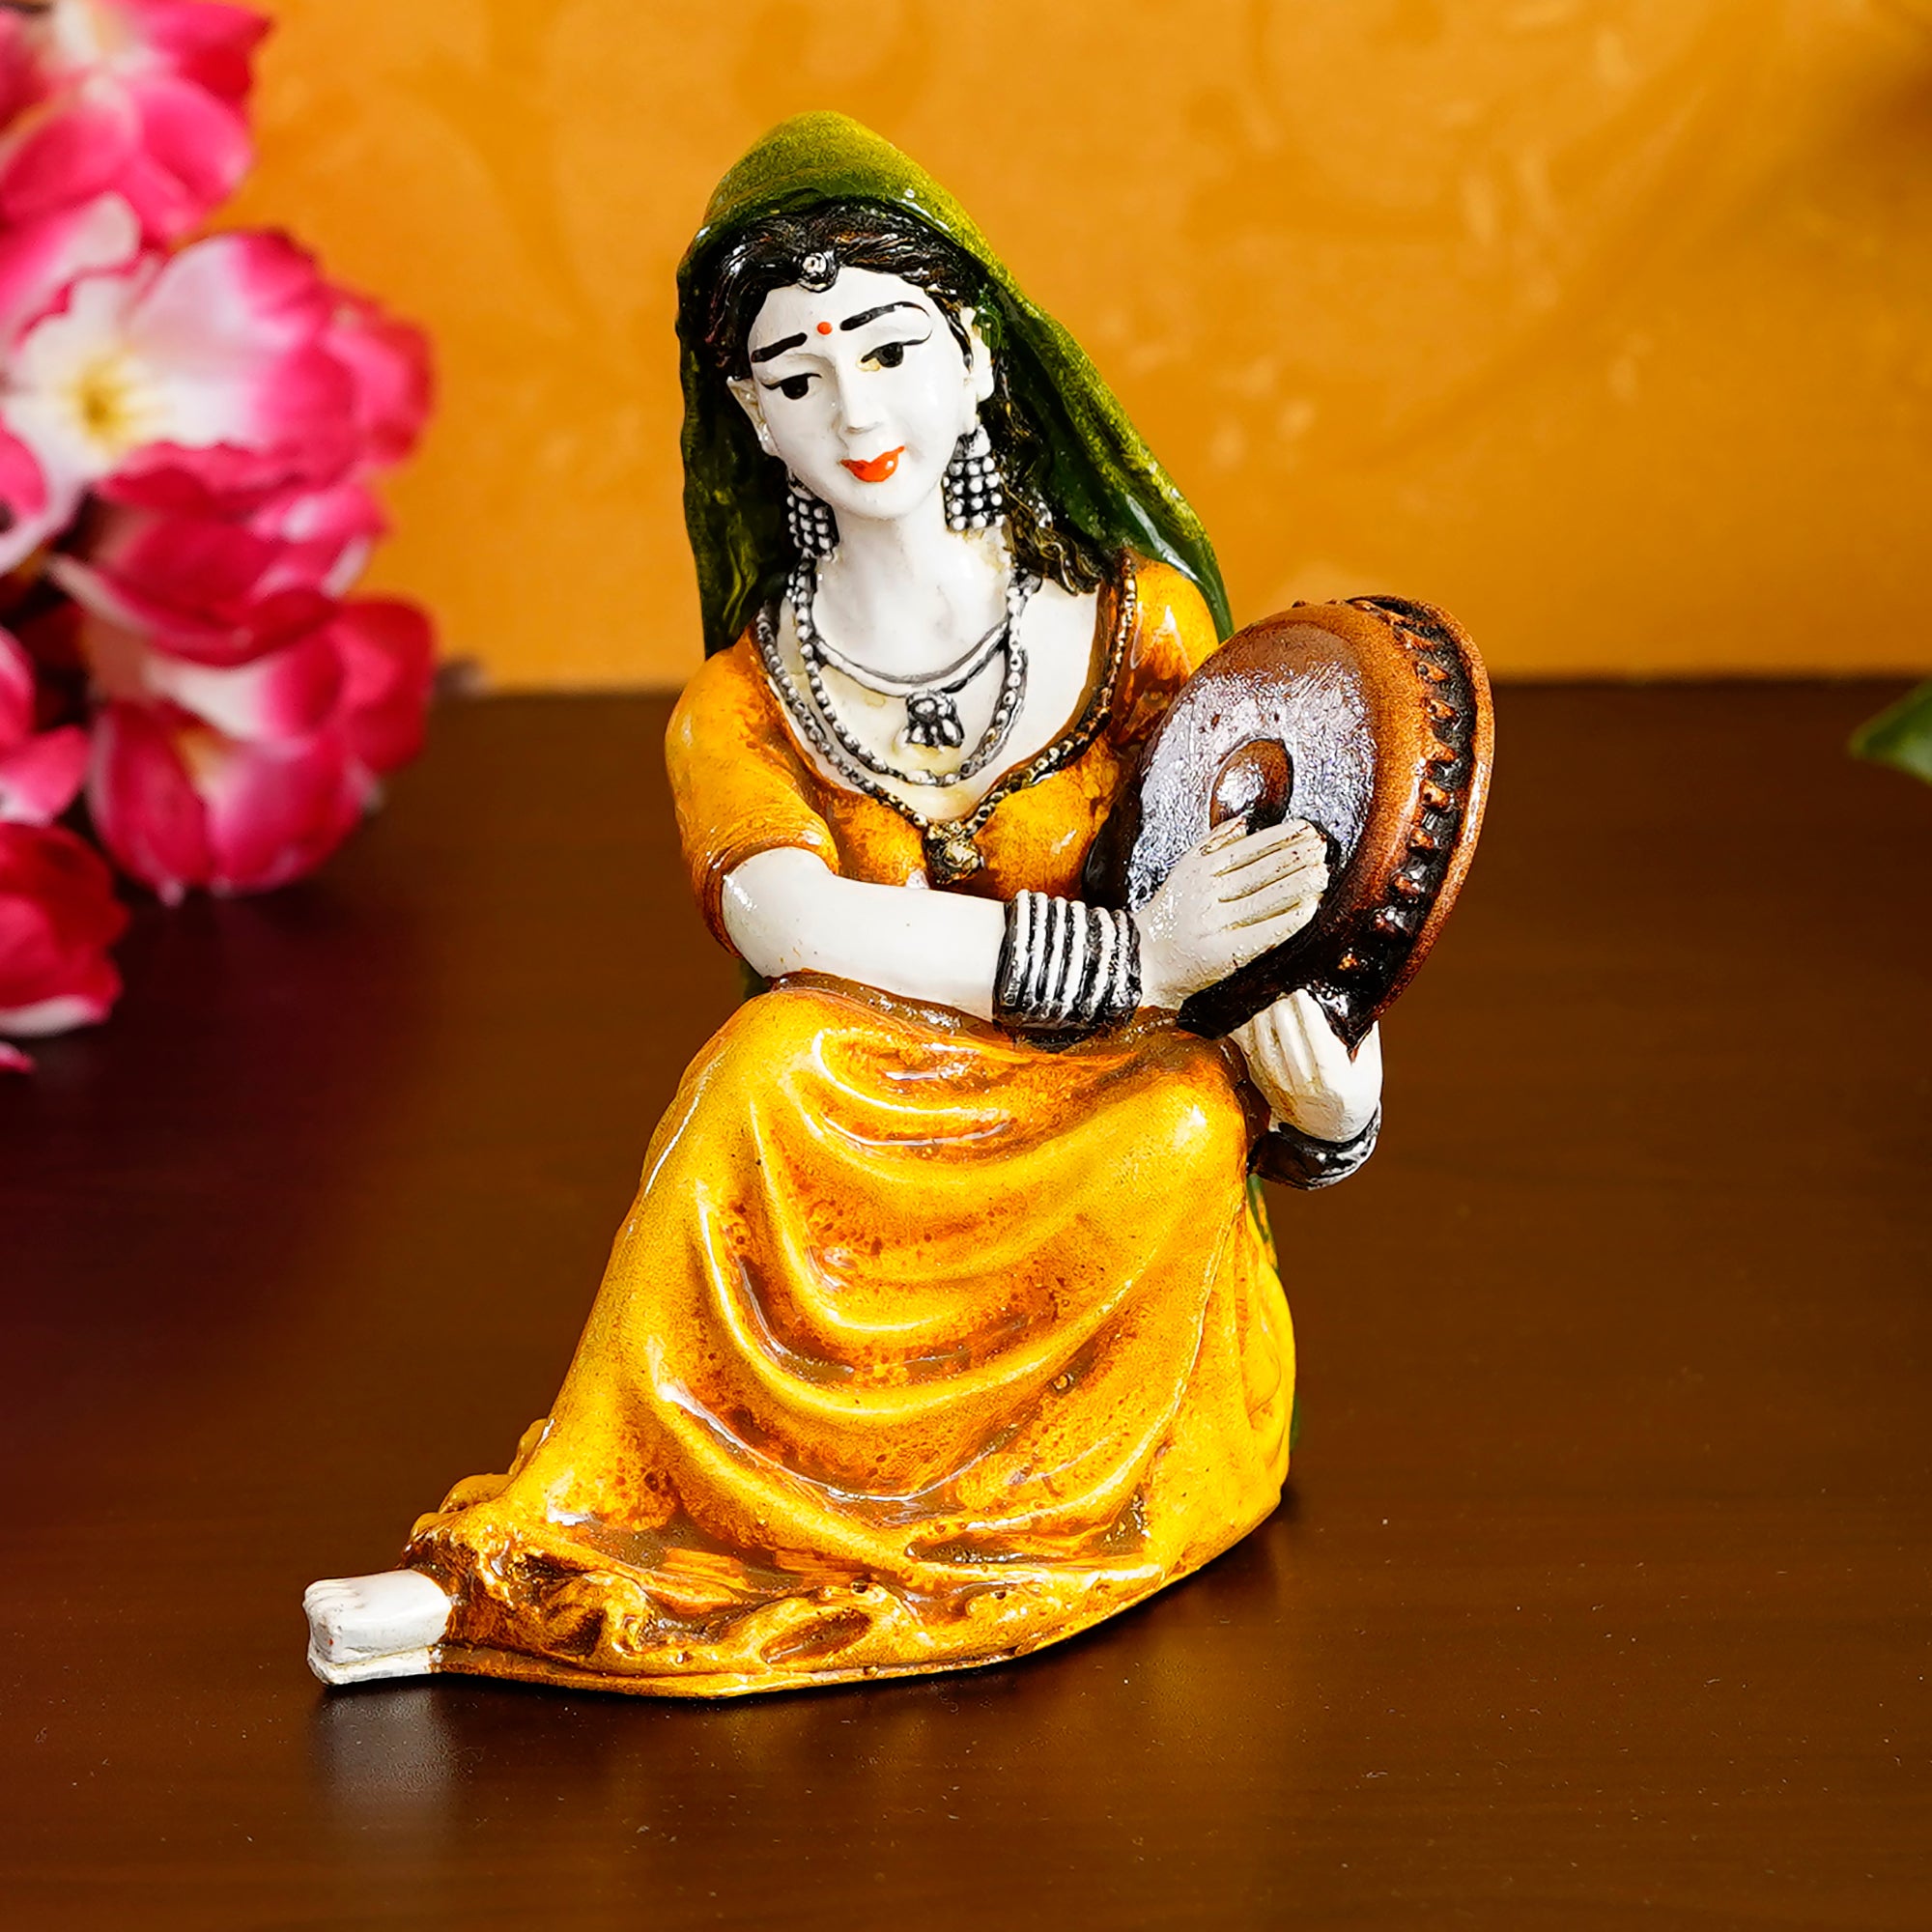 Polyresin Rajasthani Women Statue Playing Musical Instrument Handcrafted Human Figurine Decorative Showpiece 1